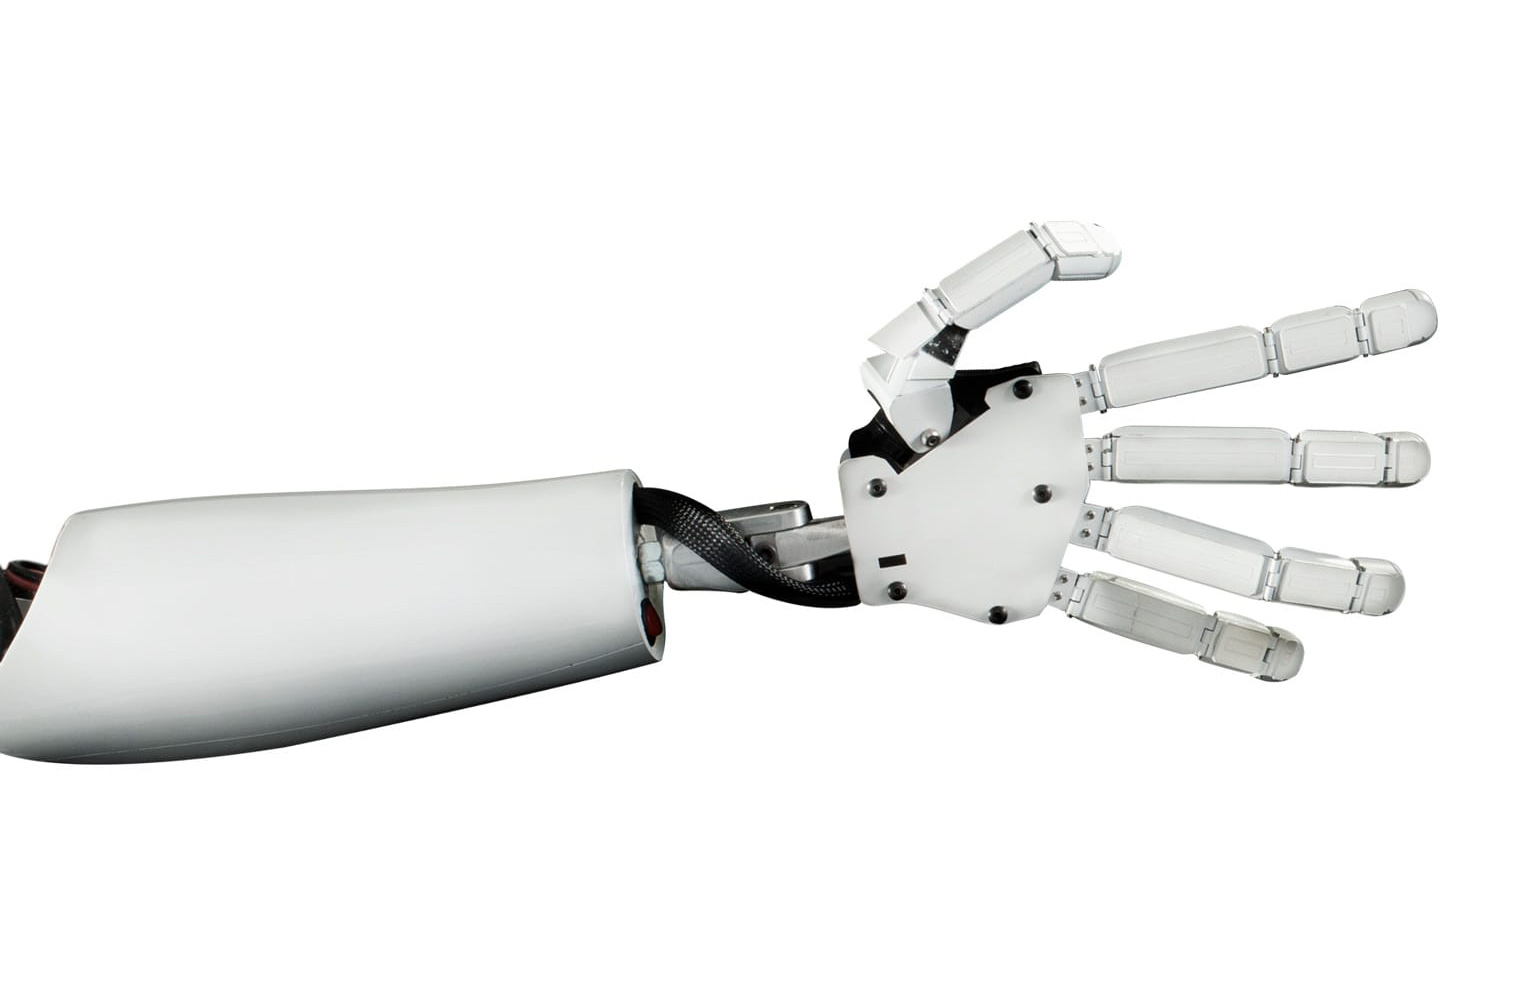 A sleek, white robot arm outstretched with an open hand